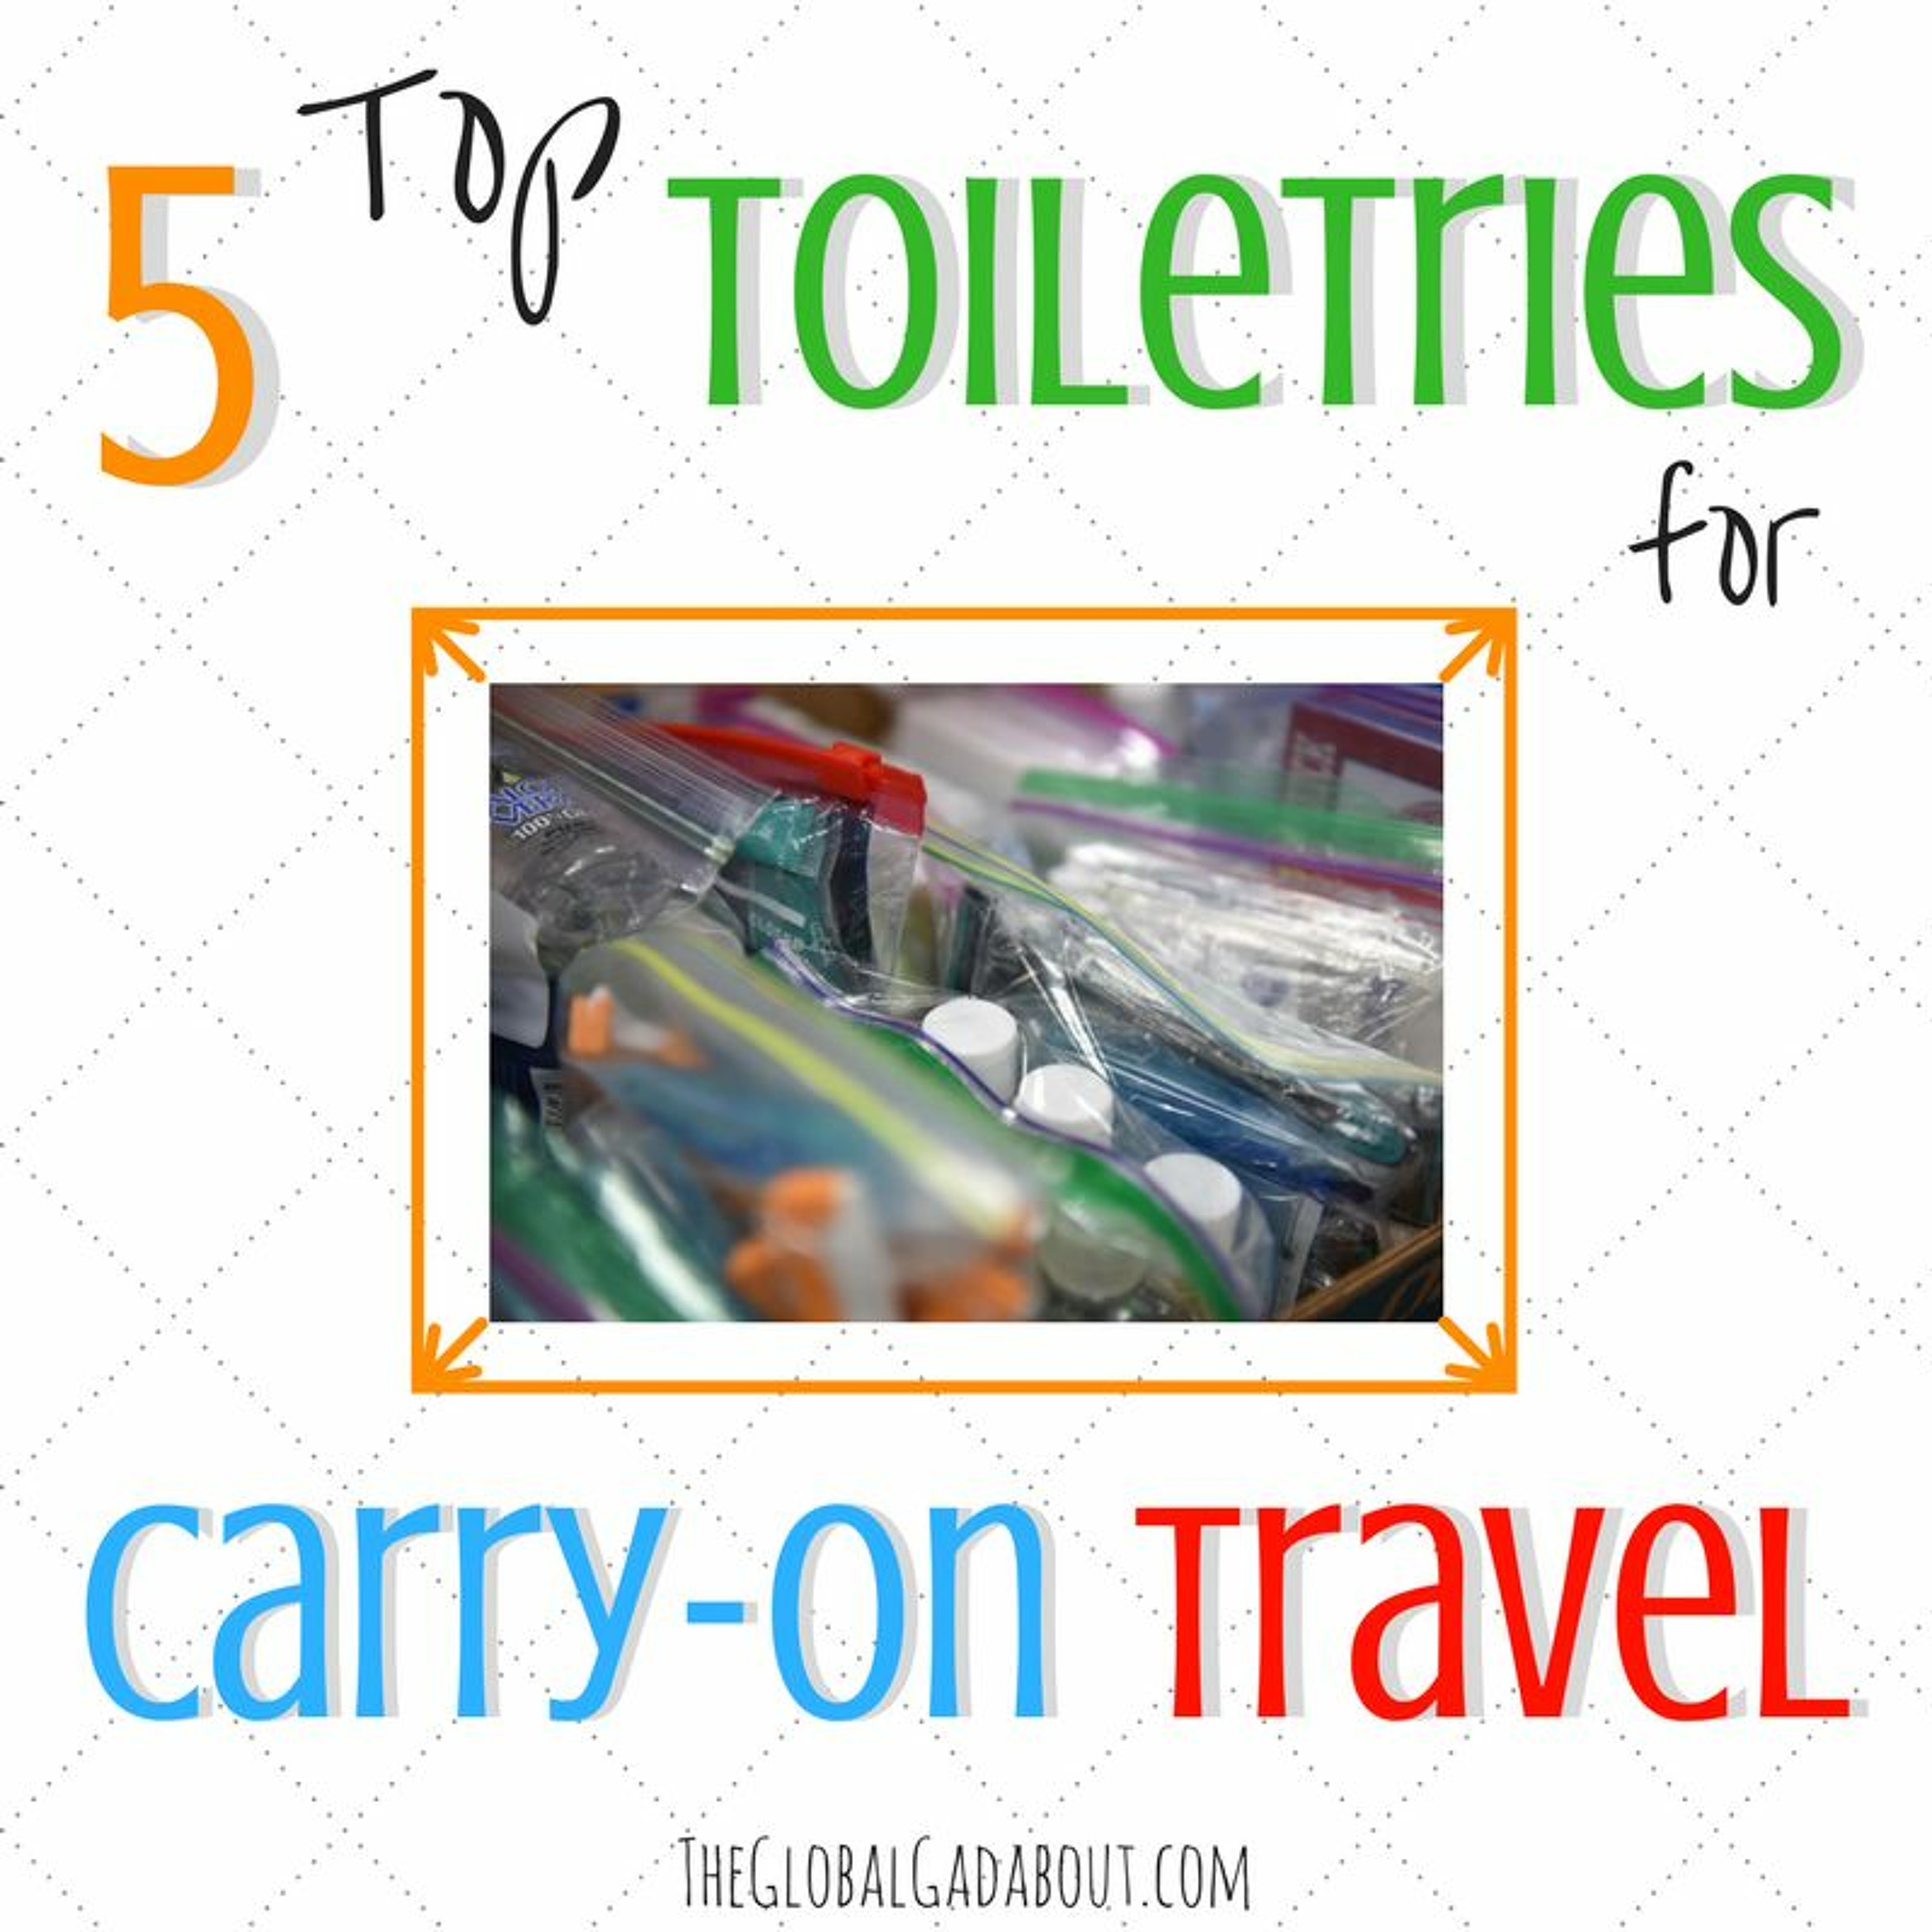 5 Top Toiletries For Carry-On Travel